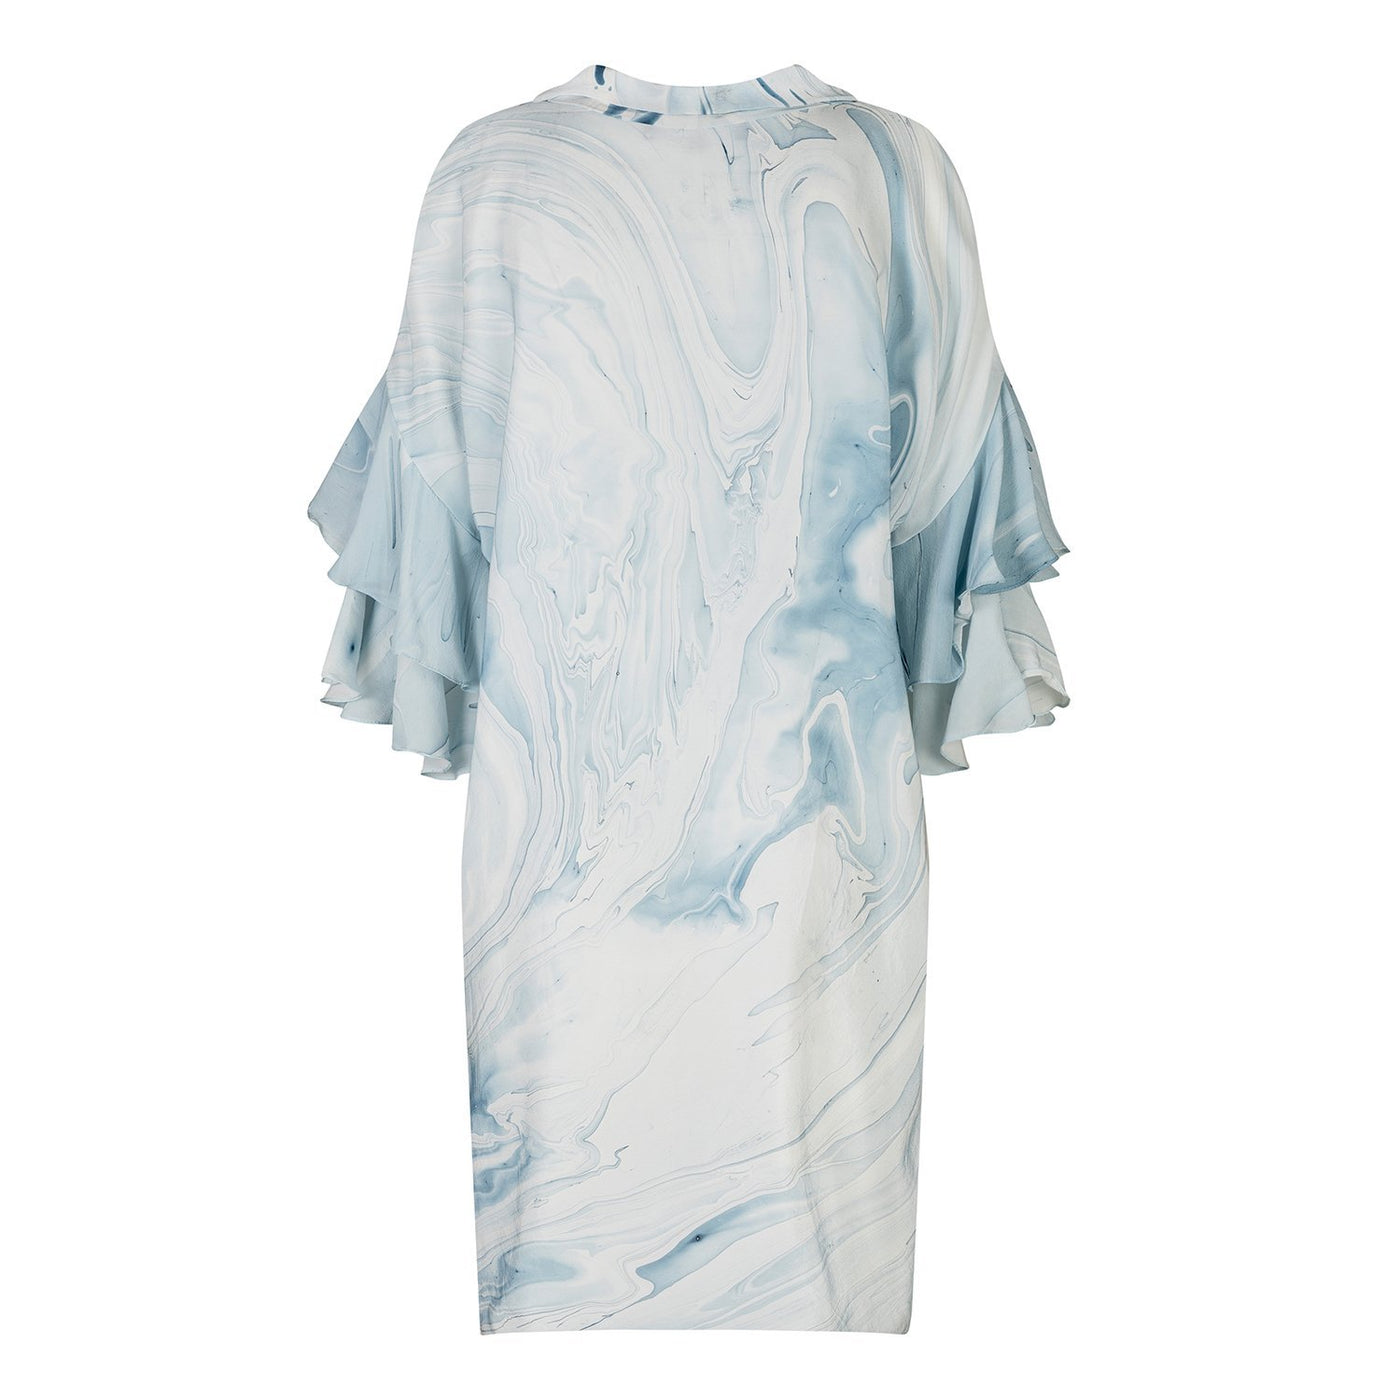 Bow Neck Marbled Dress - The Clothing LoungeEdward Mongzar